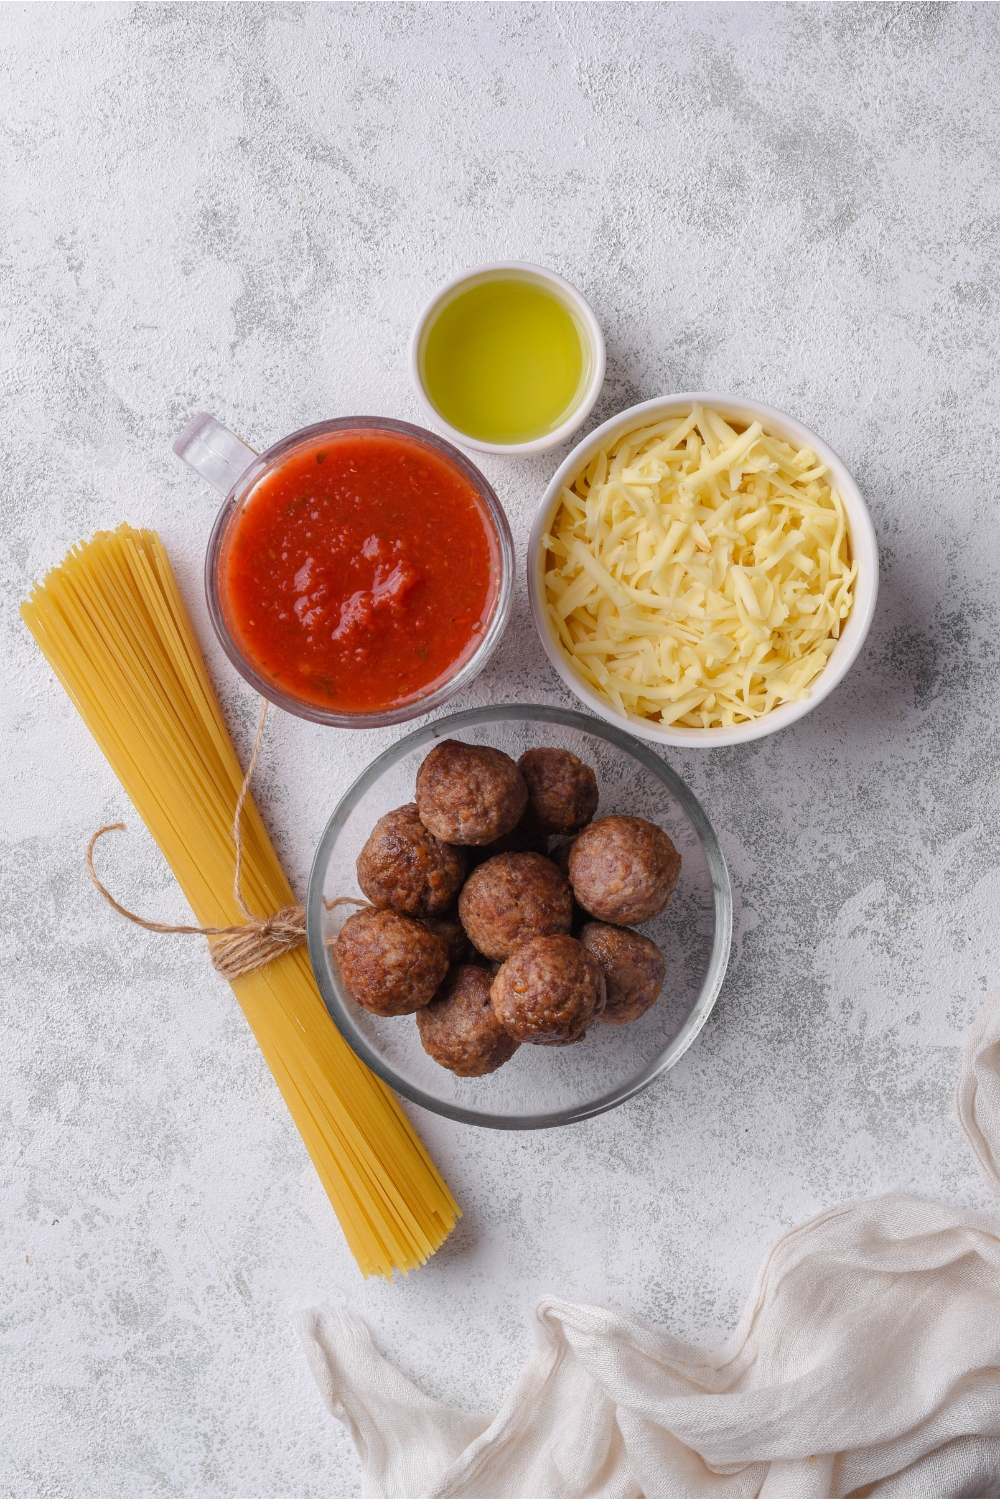 An assortment of ingredients including bowls of red sauce, oil, shredded cheese, meatballs, and a bundle of spaghetti noodles.